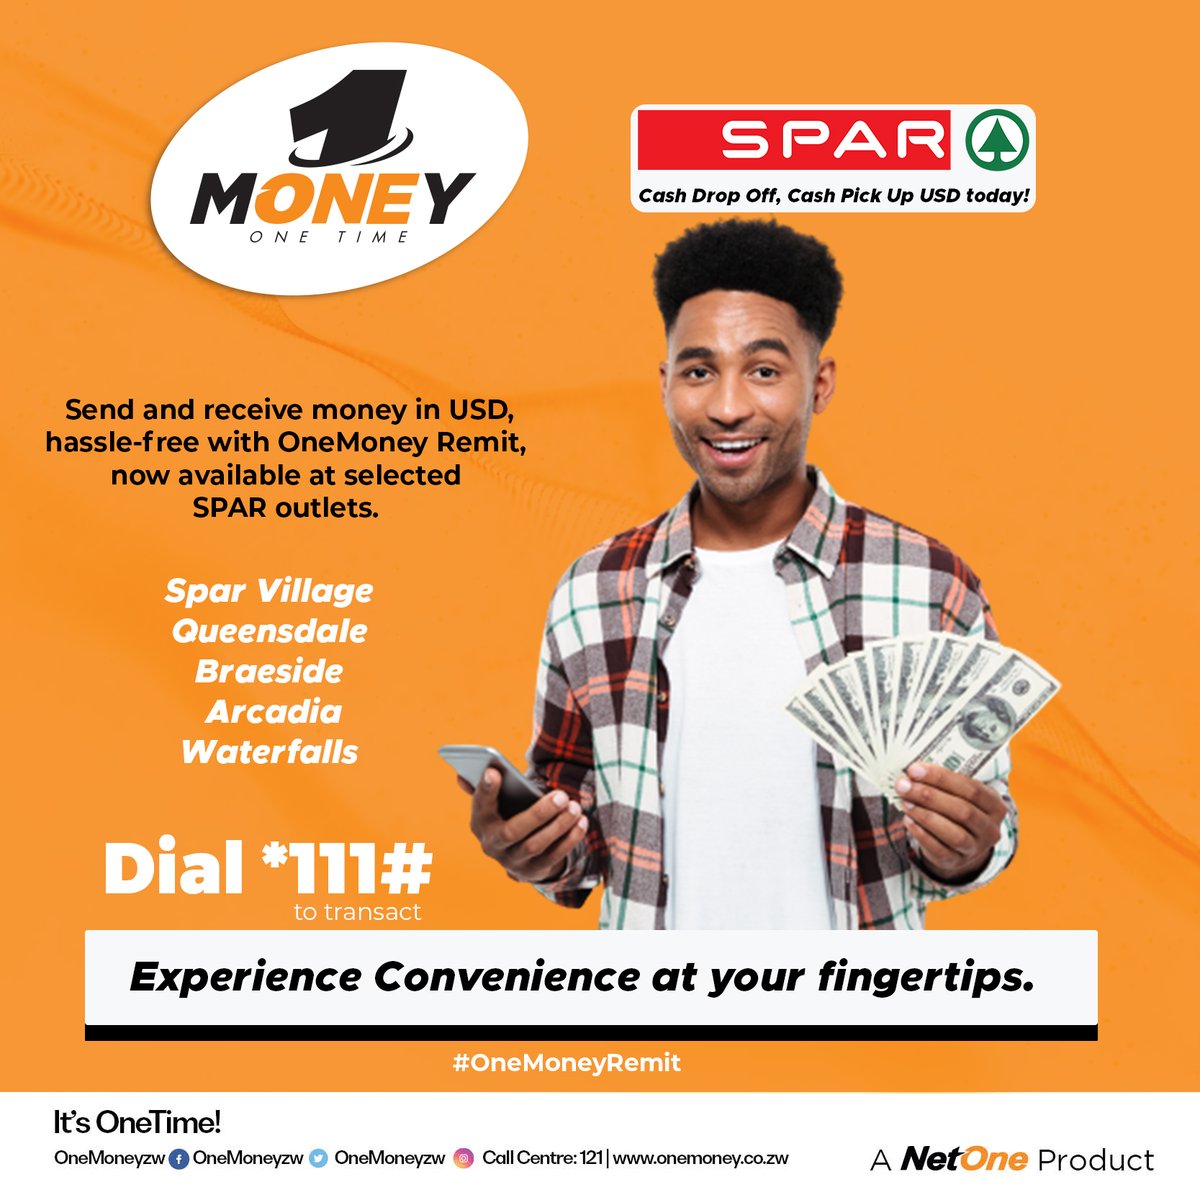 Cash in/out USD via OneMoney with ease at any of the listed Spar outlets. No queues & cash guaranteed. 💸Hurry now and experience the convenience you've been waiting for! Visit Spar Village, Queensdale, Braeside, Arcadia, and Waterfall. #OneMoney #ConvenientMove